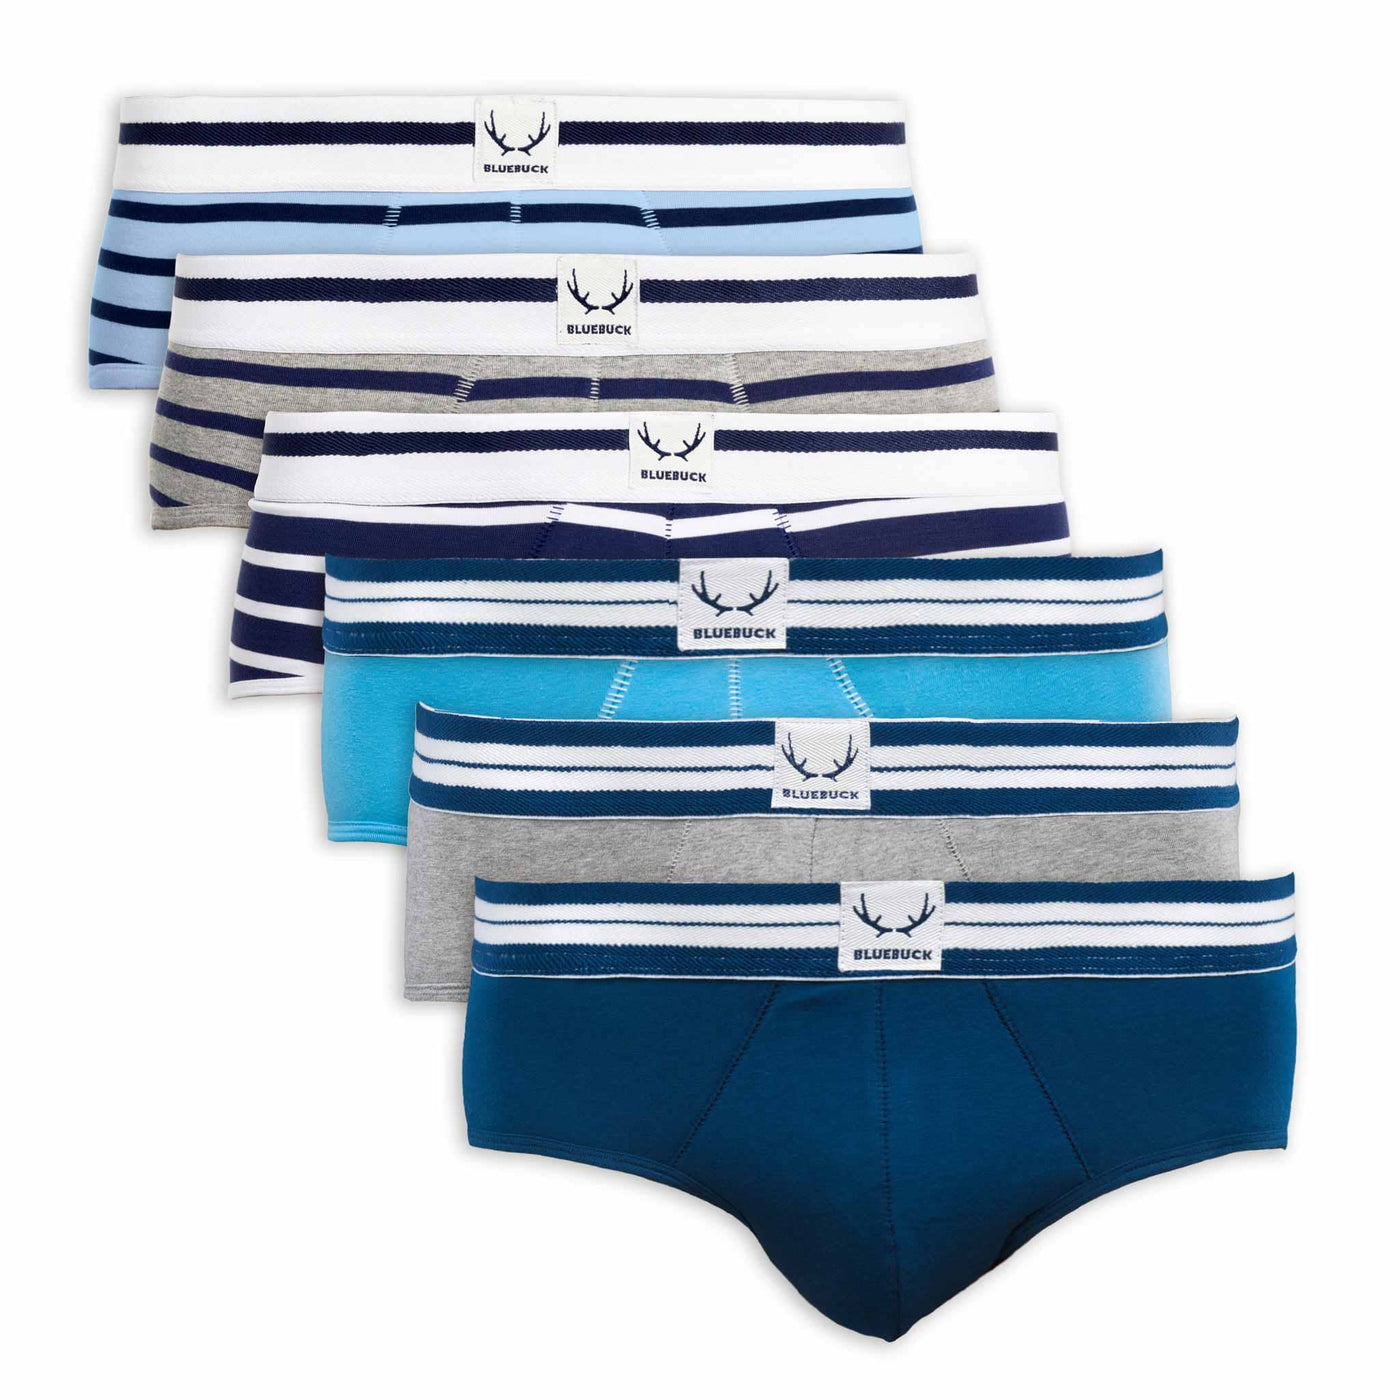 6 organic cotton briefs for men - classic and striped